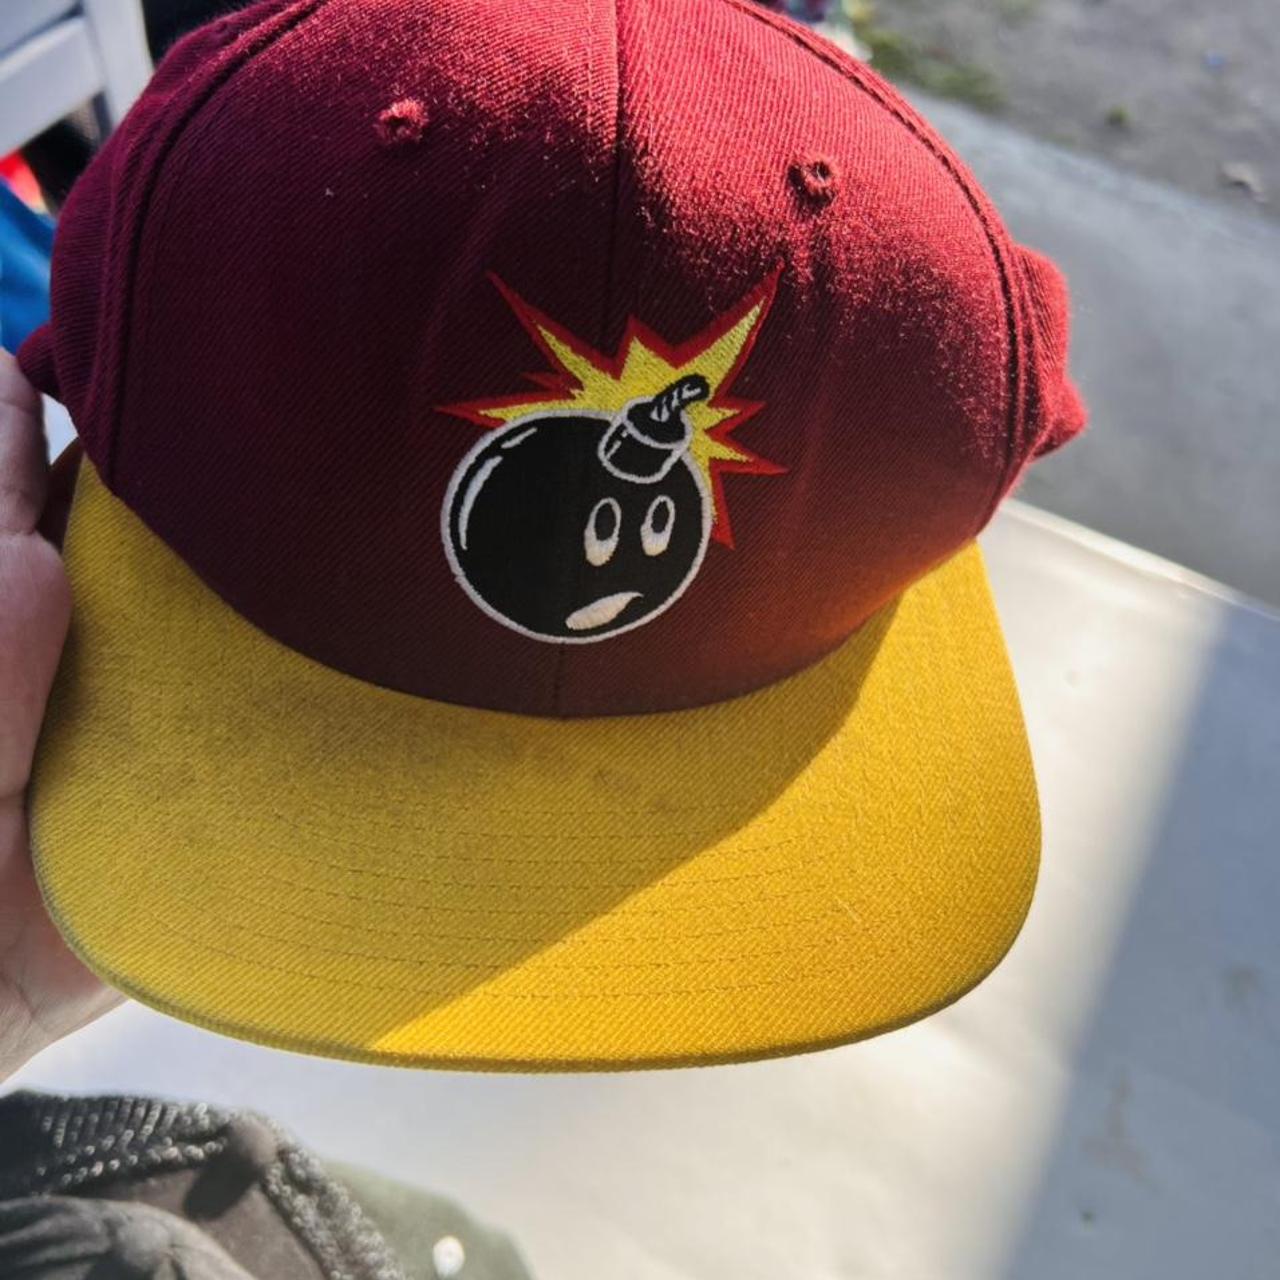 Product Image 1 - The hundreds 
Burgundy and yellow